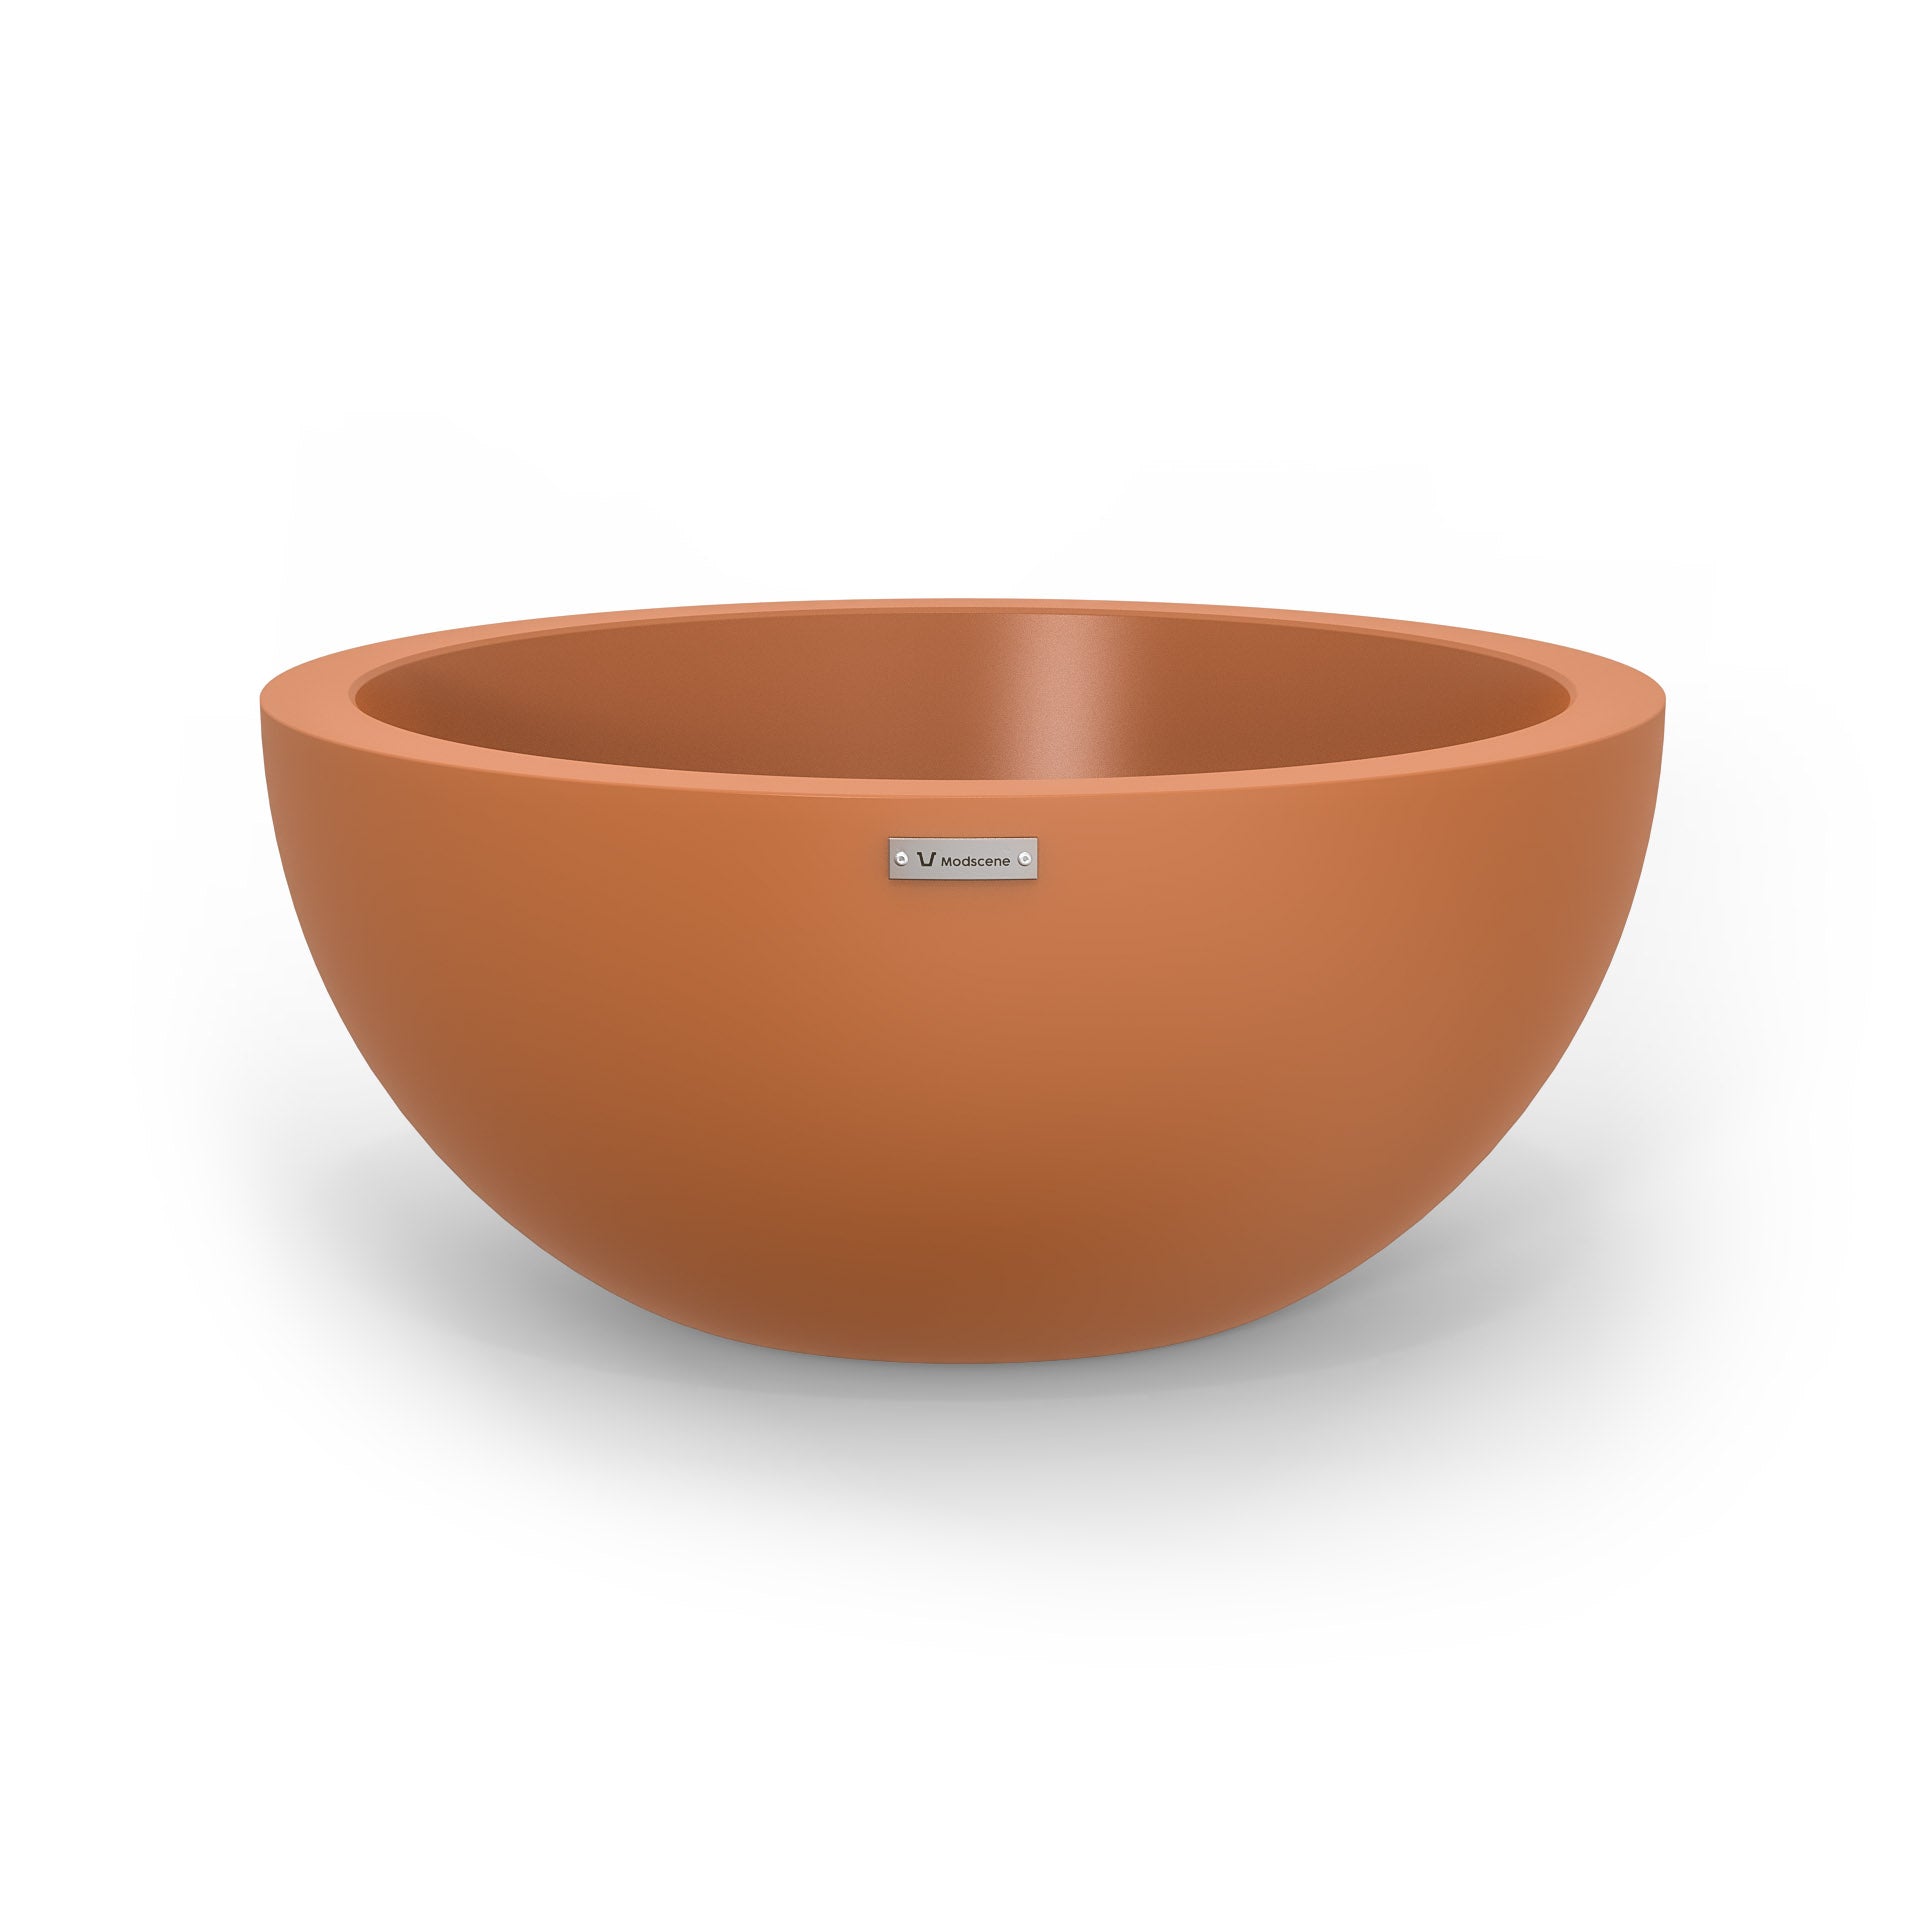 A large planter bowl in a terracotta colour made by Modscene. Australian planters.